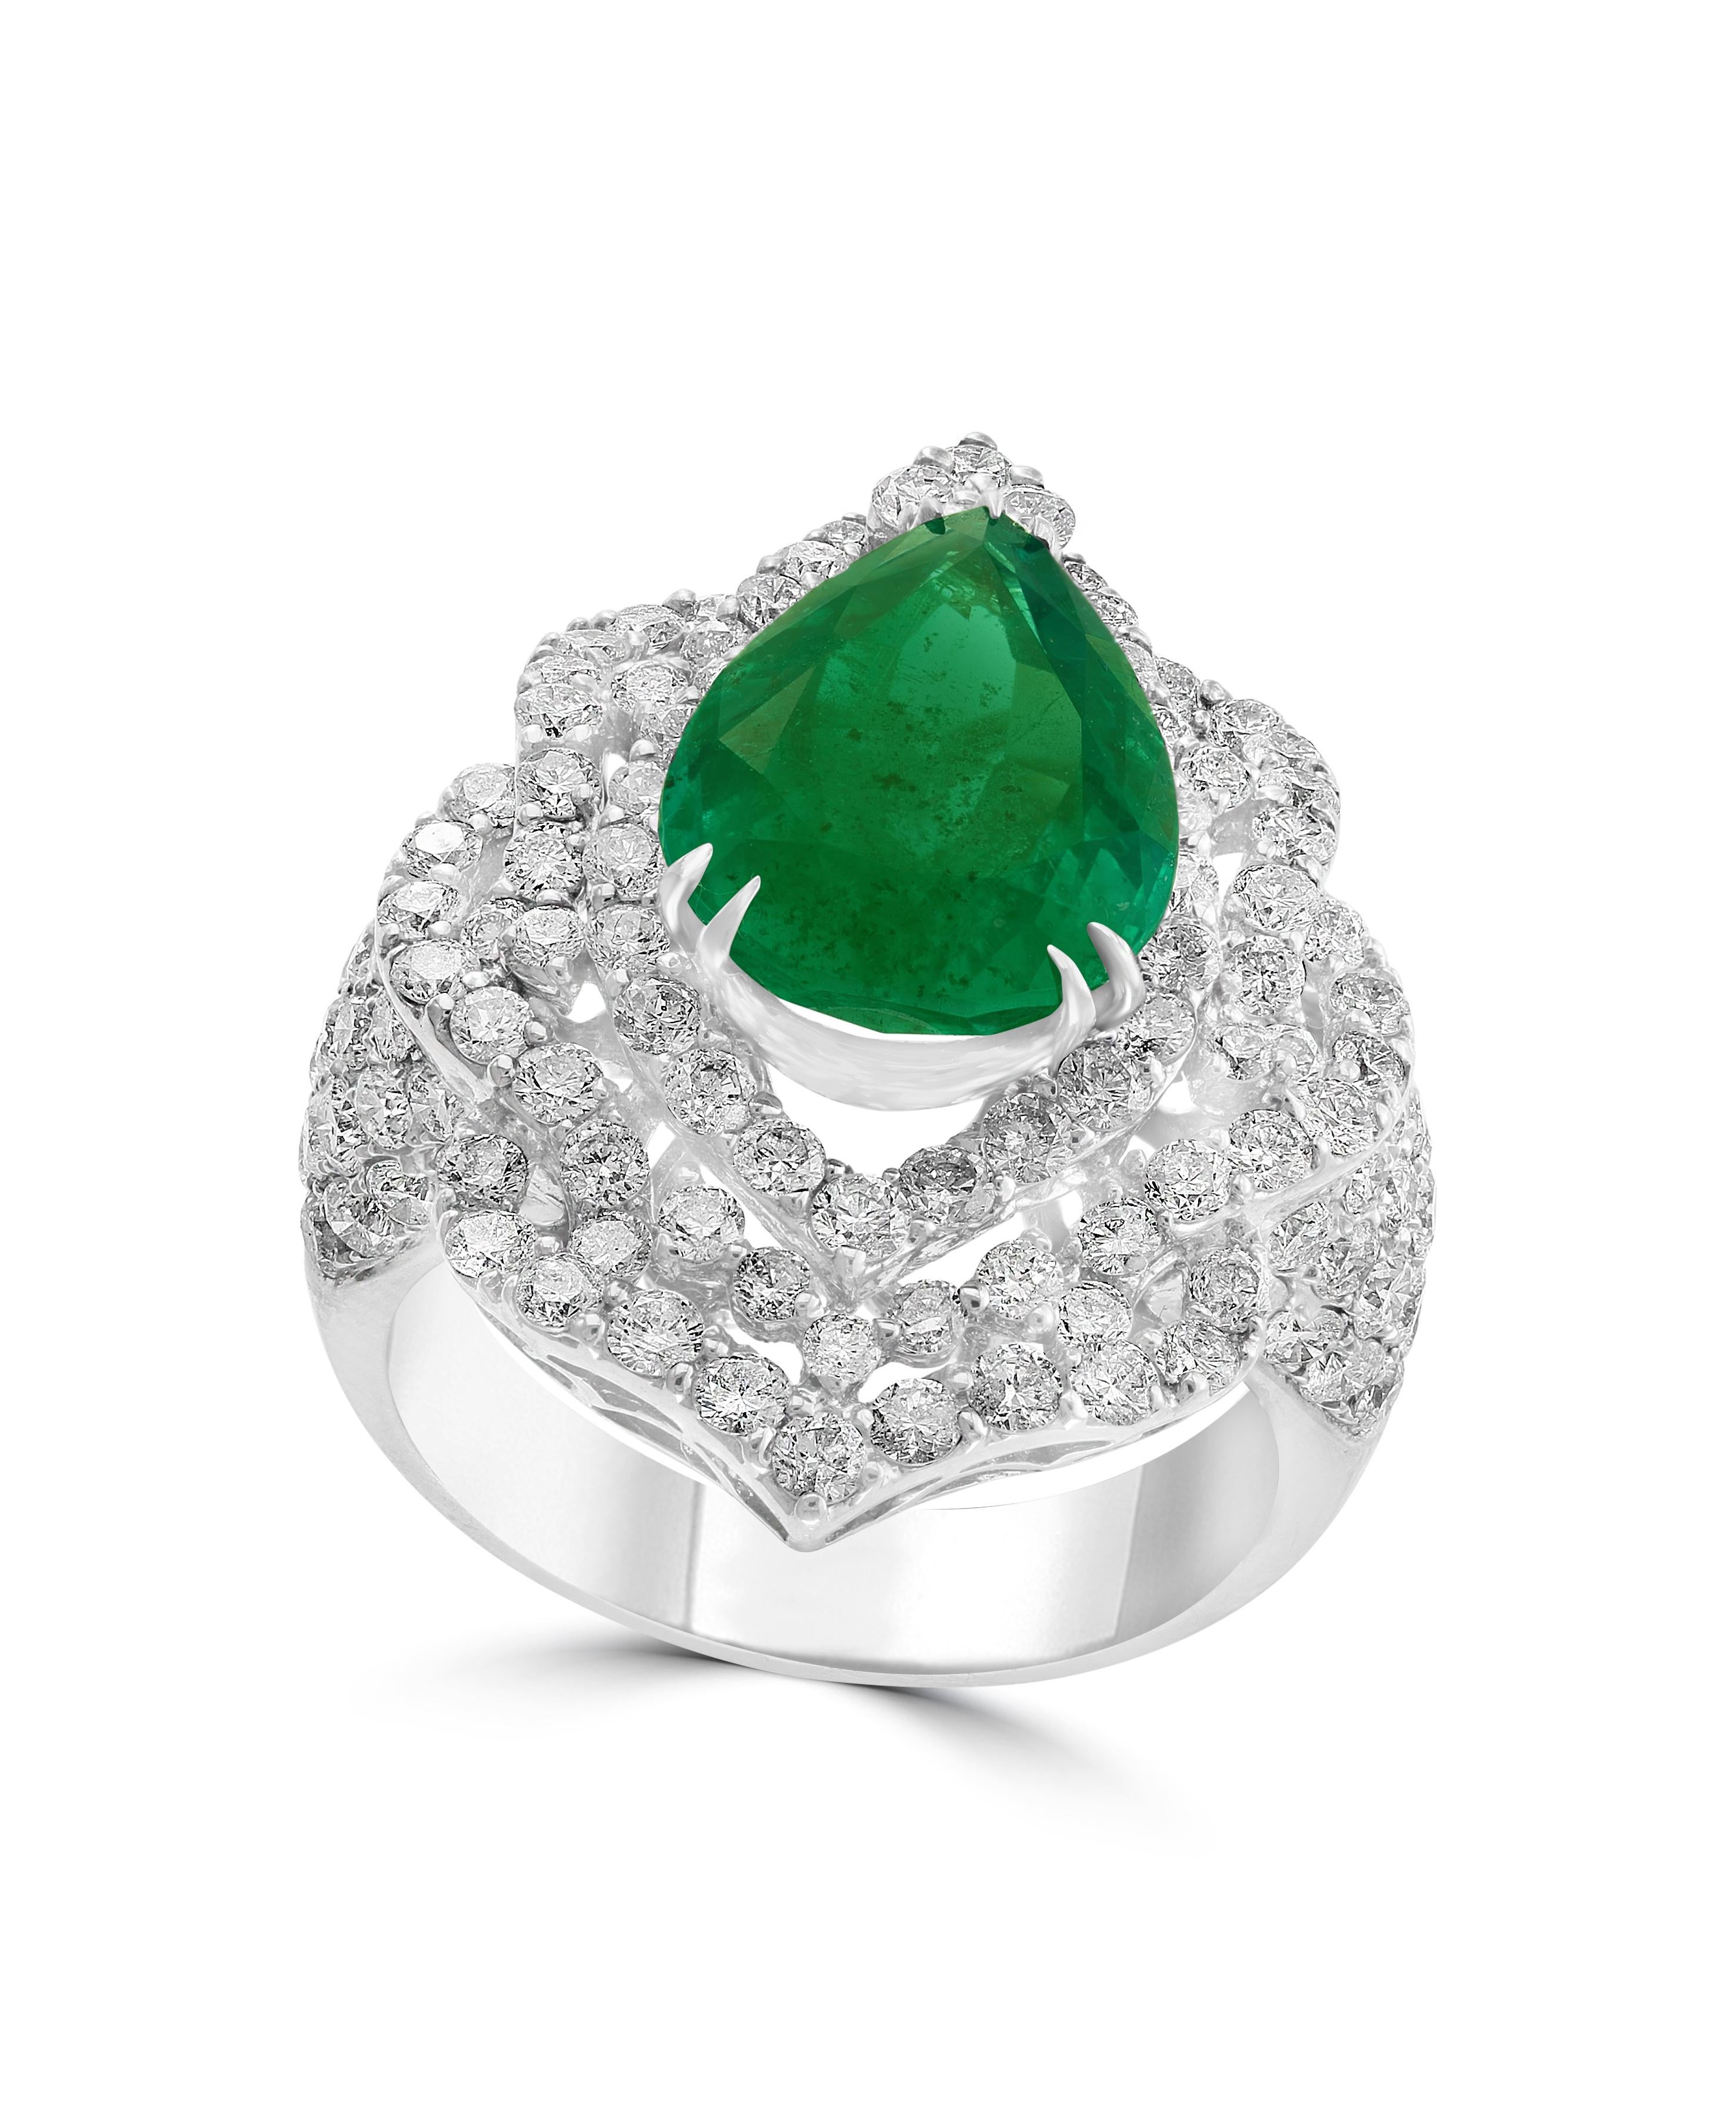 This classic Cocktail ring is a true masterpiece, featuring a breathtaking 4.75 Carat Colombian Emerald that is set in 18 Karat white gold. The estate ring is one of our finest pieces, with no color enhancement to ensure that the natural beauty of